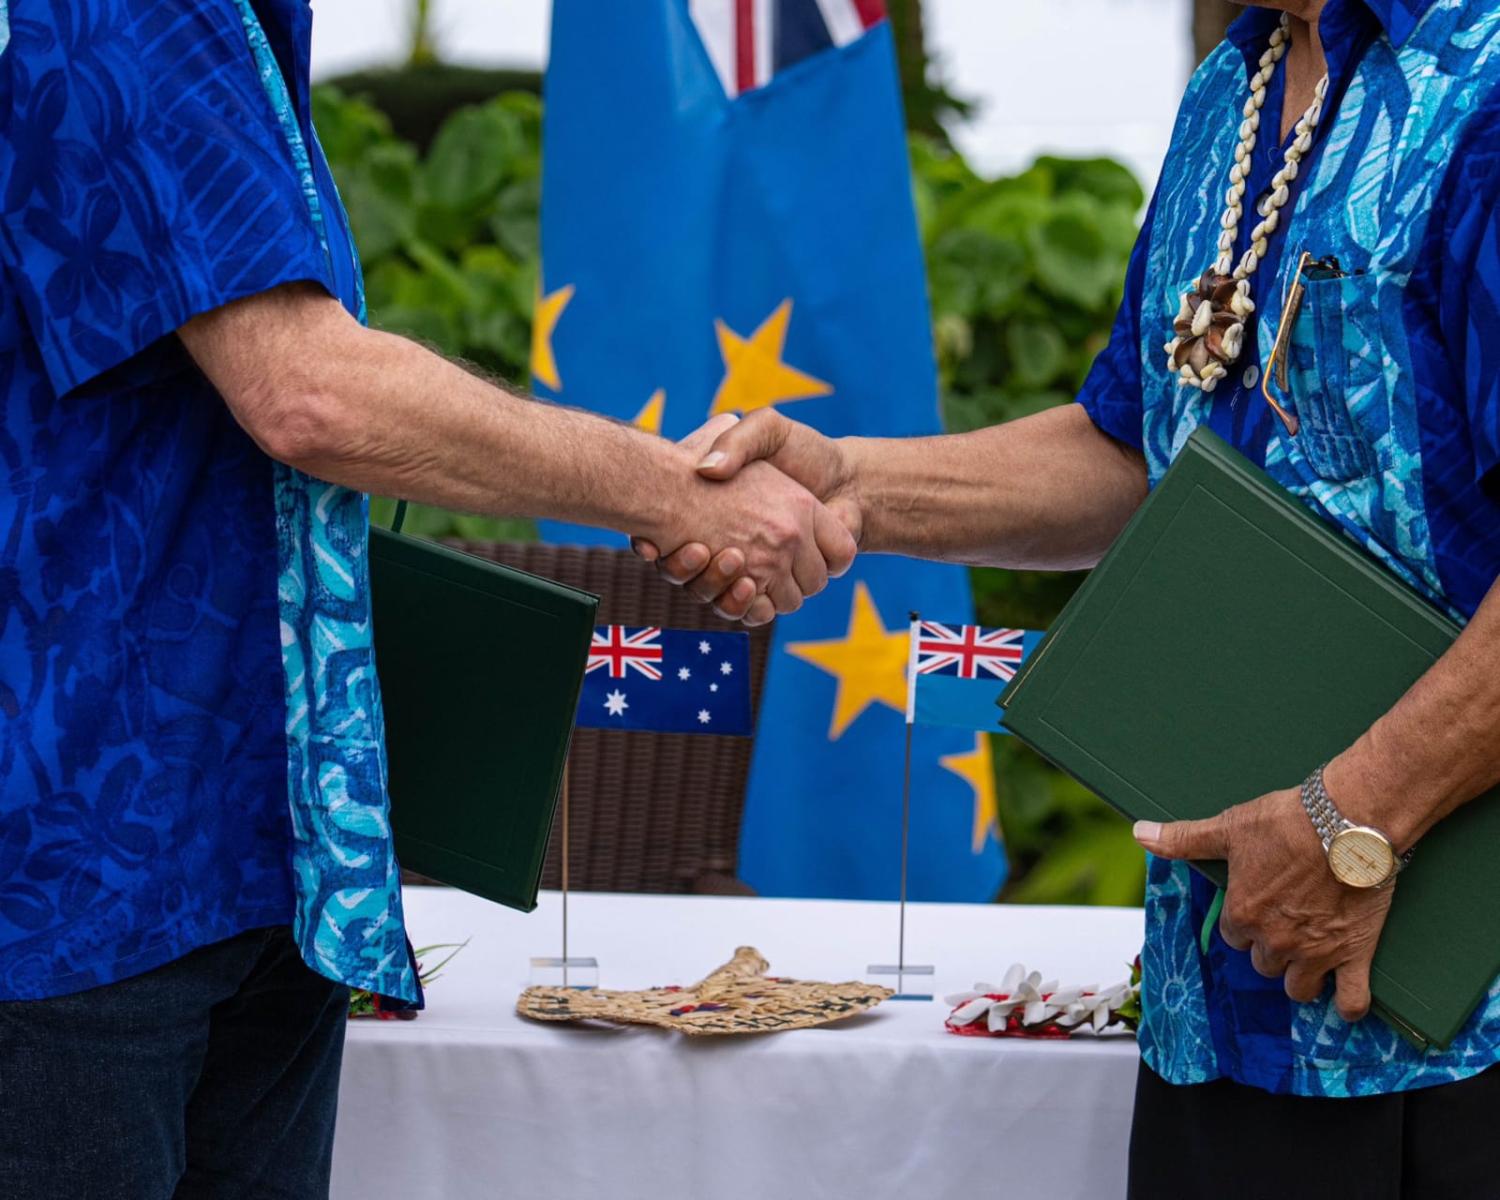 Australia's Prime Minister Anthony Albanese shakes hands with Tuvalu's Prime Minister Kausea Natano after signing the “Falepili Union” on 10 November (AlboMP/X)